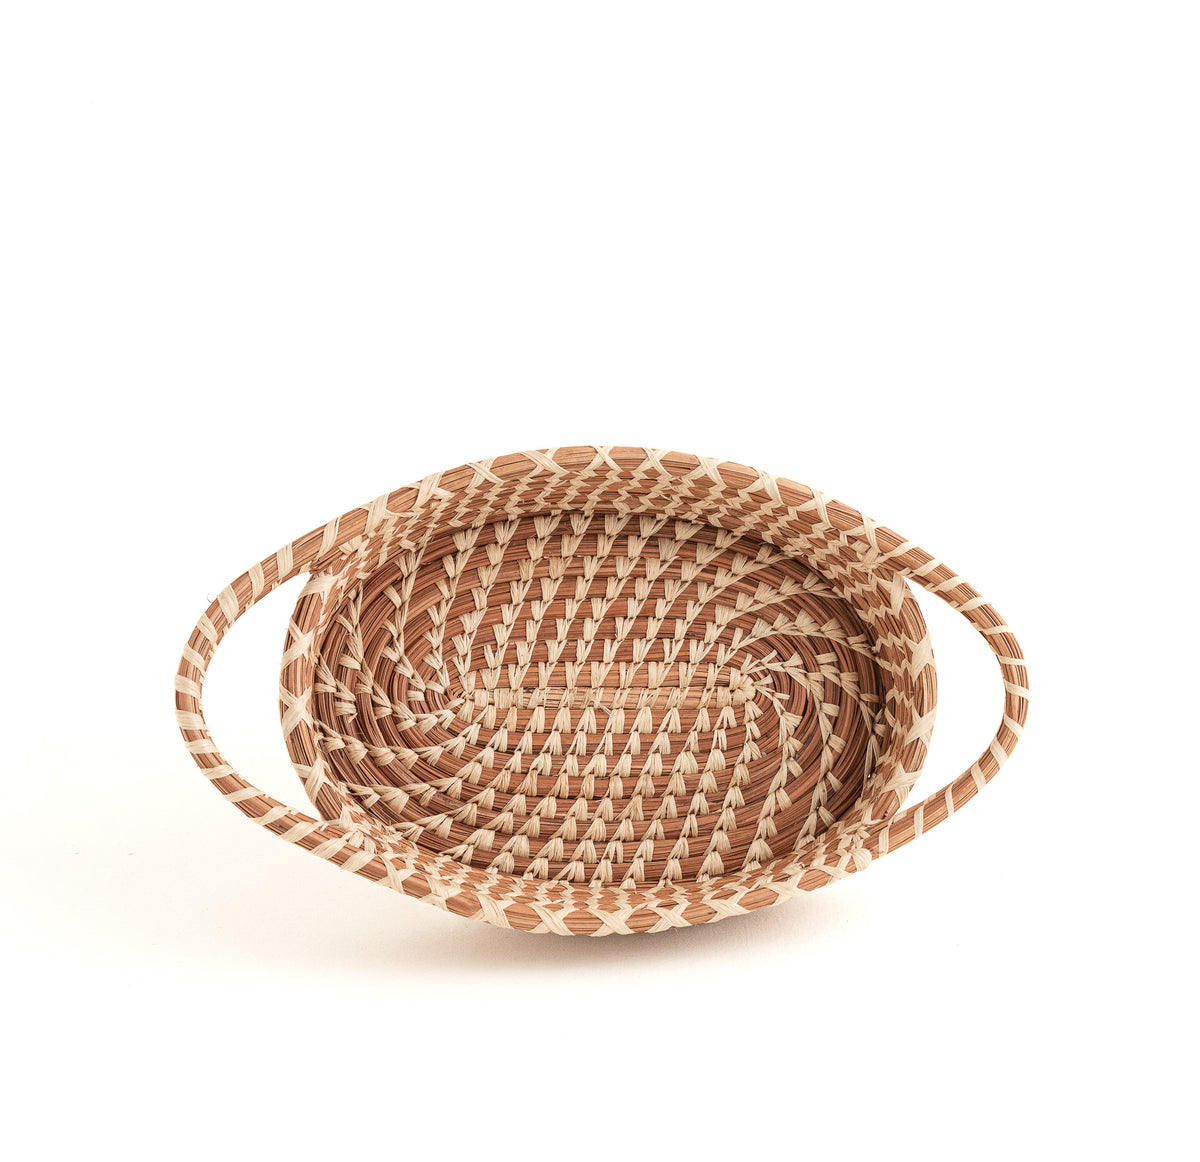 oval pine needle basket with handles, showing top view and intricate stitches